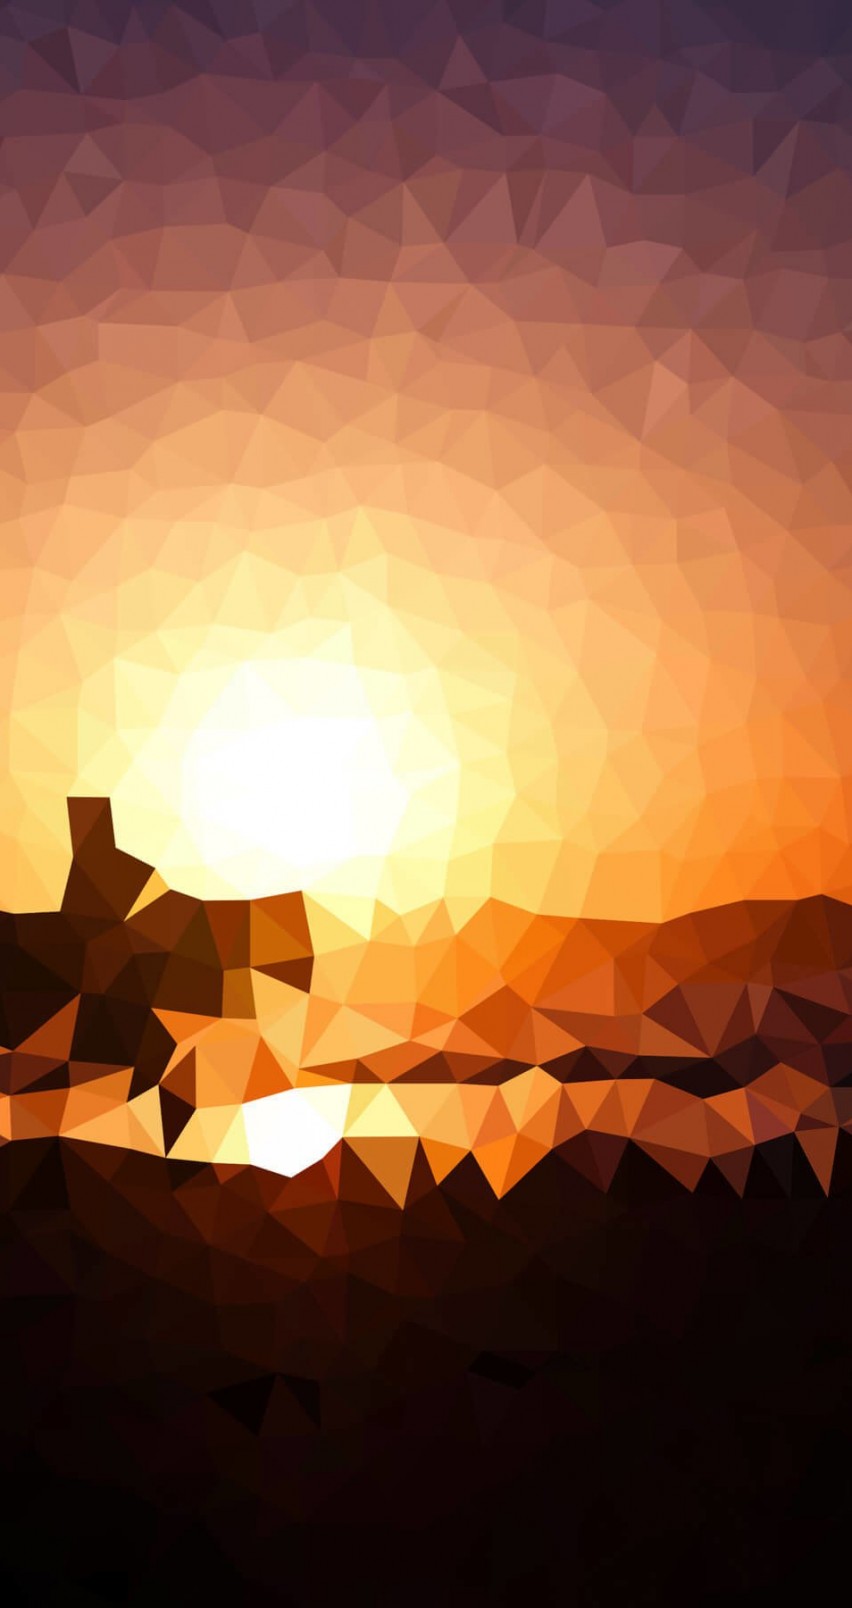 Low Poly Sunset Wallpaper for Apple iPhone 6 / 6s